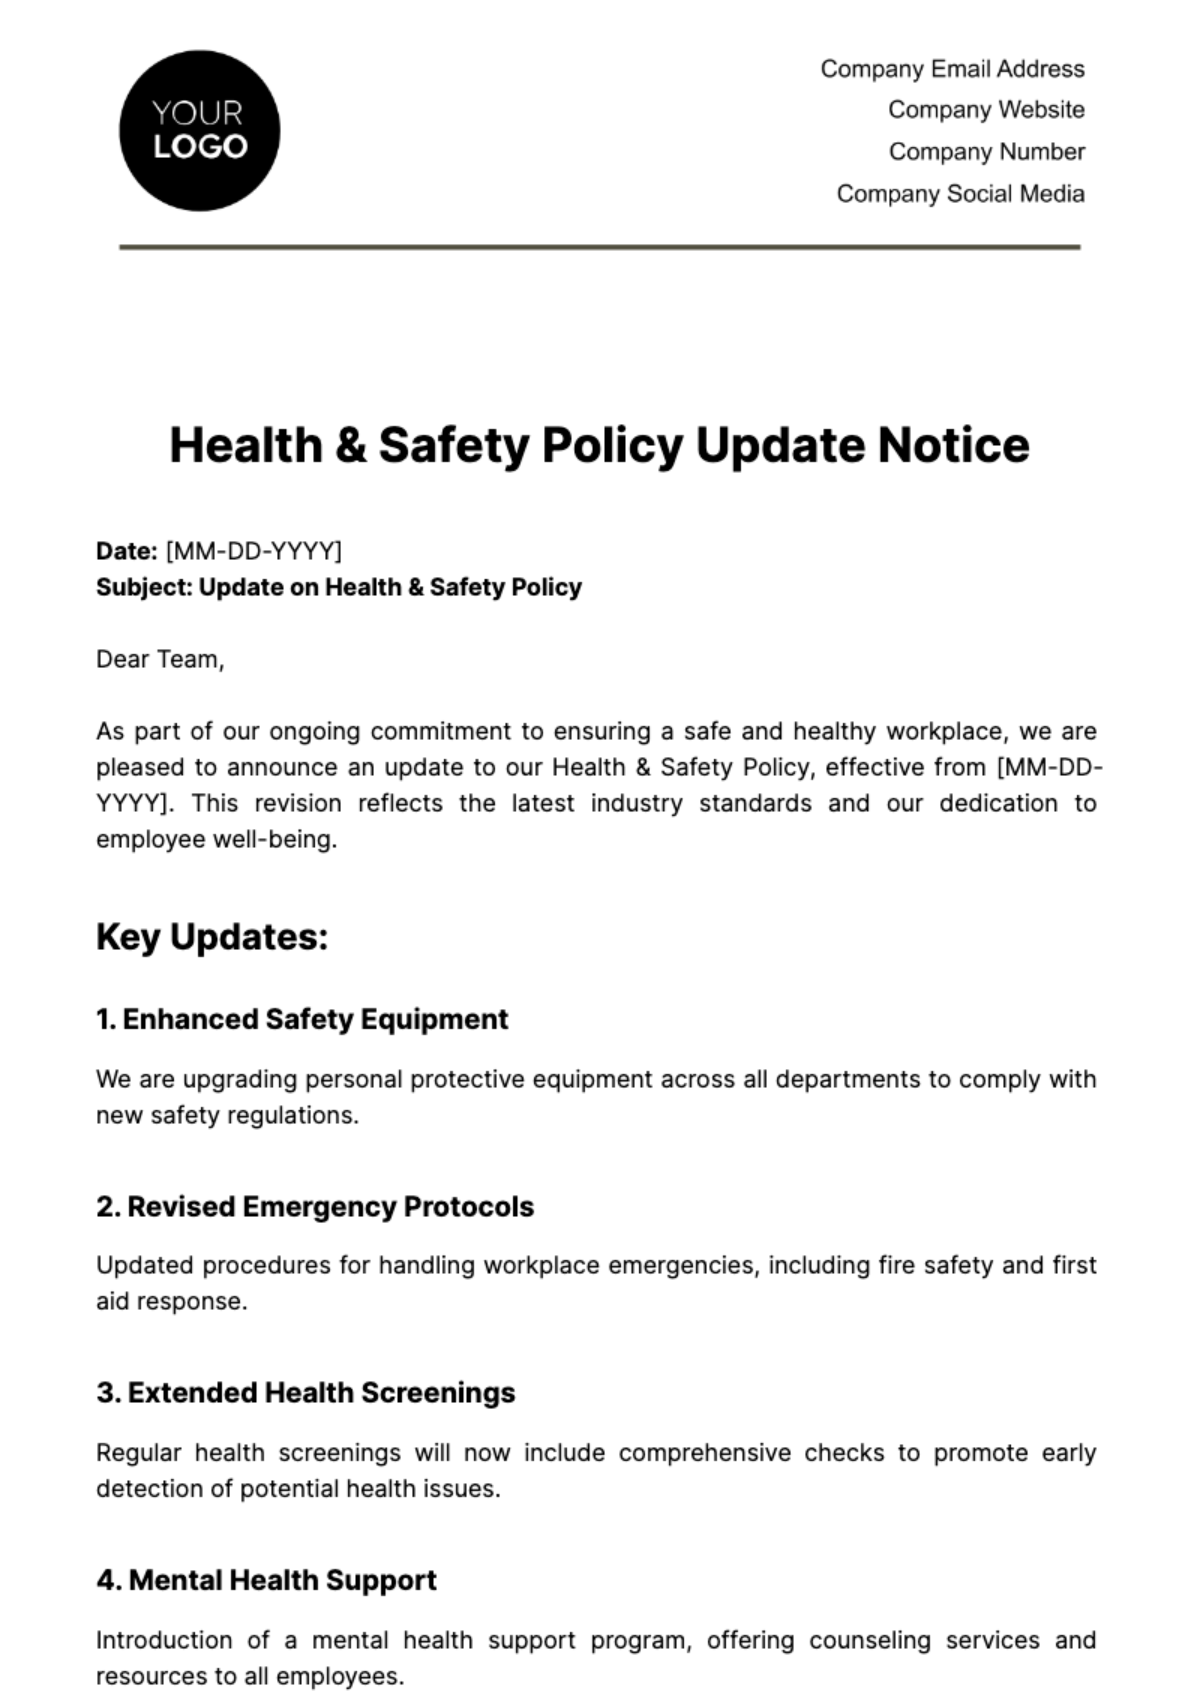 Health & Safety Policy Update Notice Template